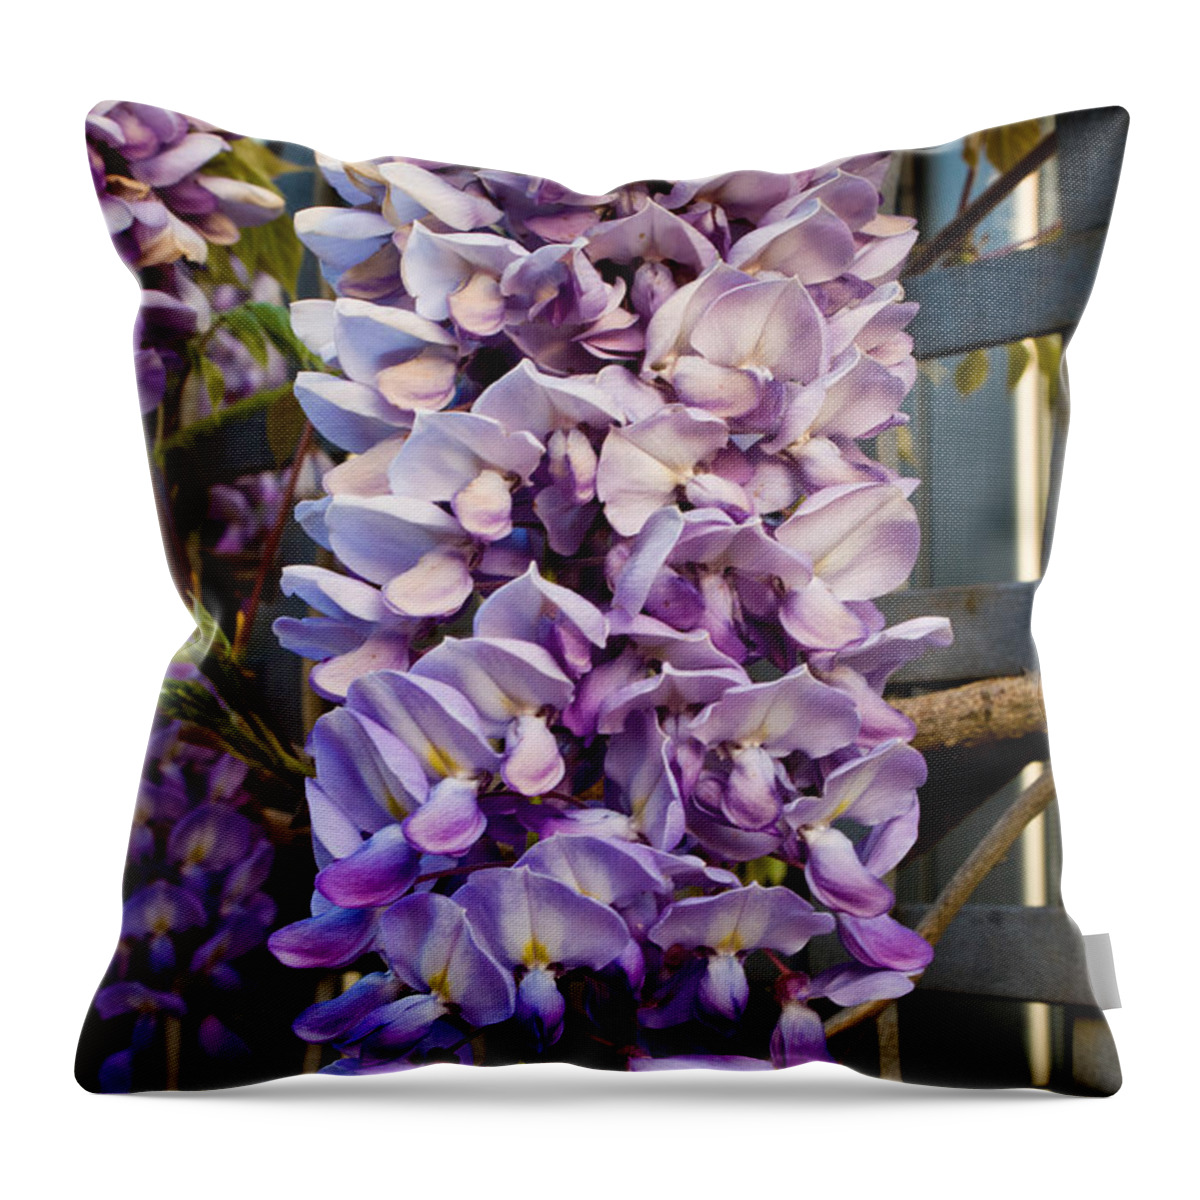  Throw Pillow featuring the photograph Purple Orchid Like Flower #1 by James Gay